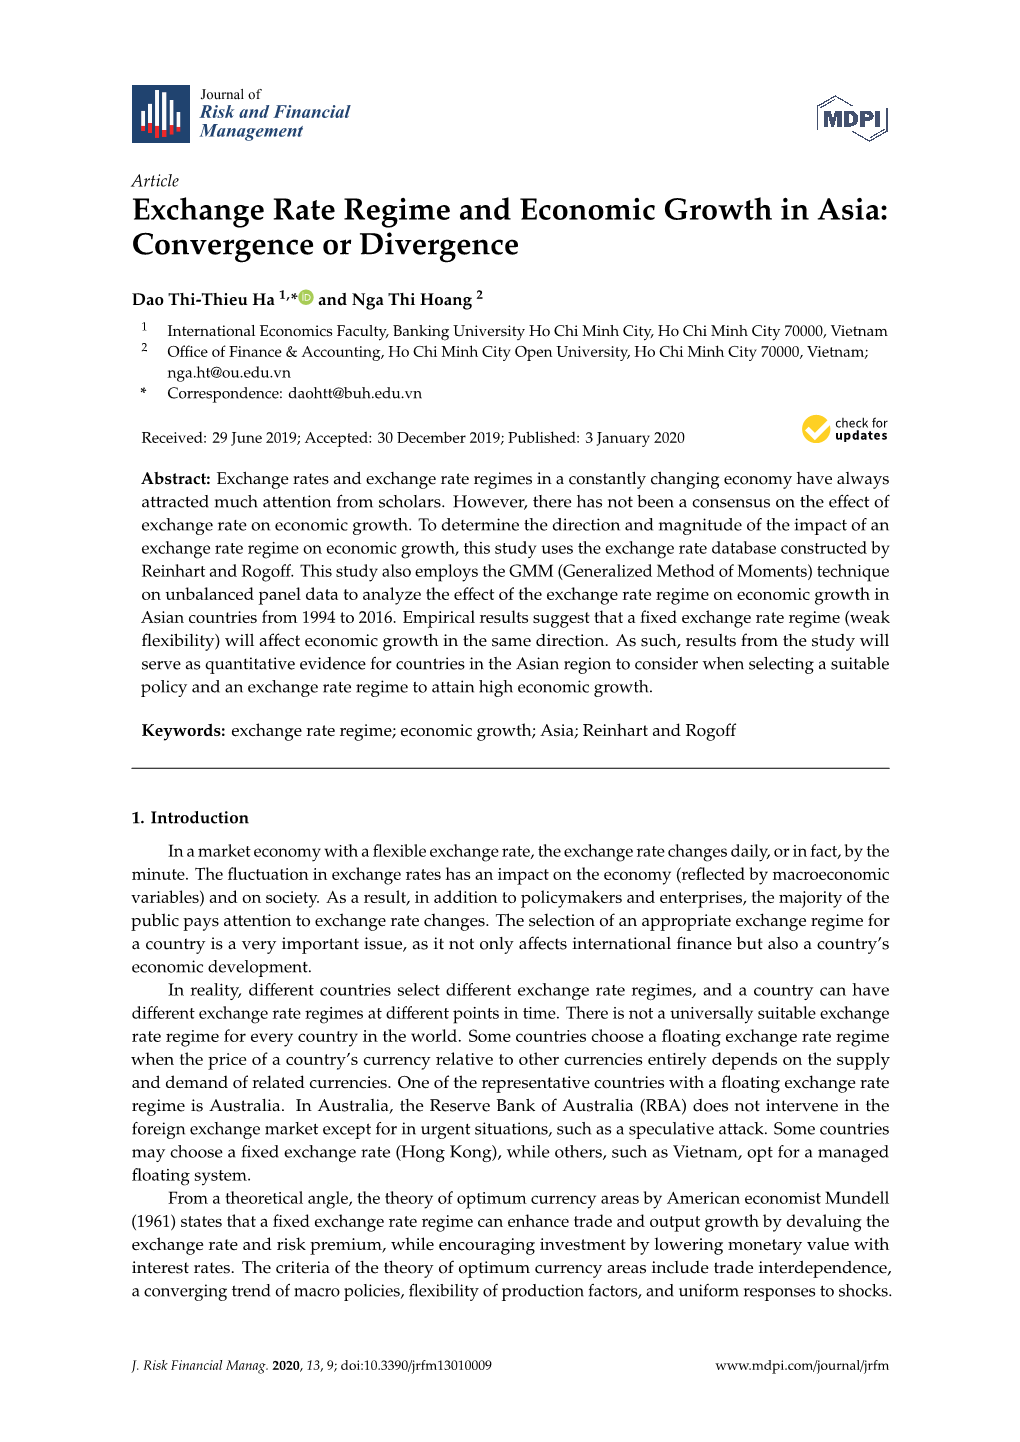 Exchange Rate Regime and Economic Growth in Asia: Convergence Or Divergence